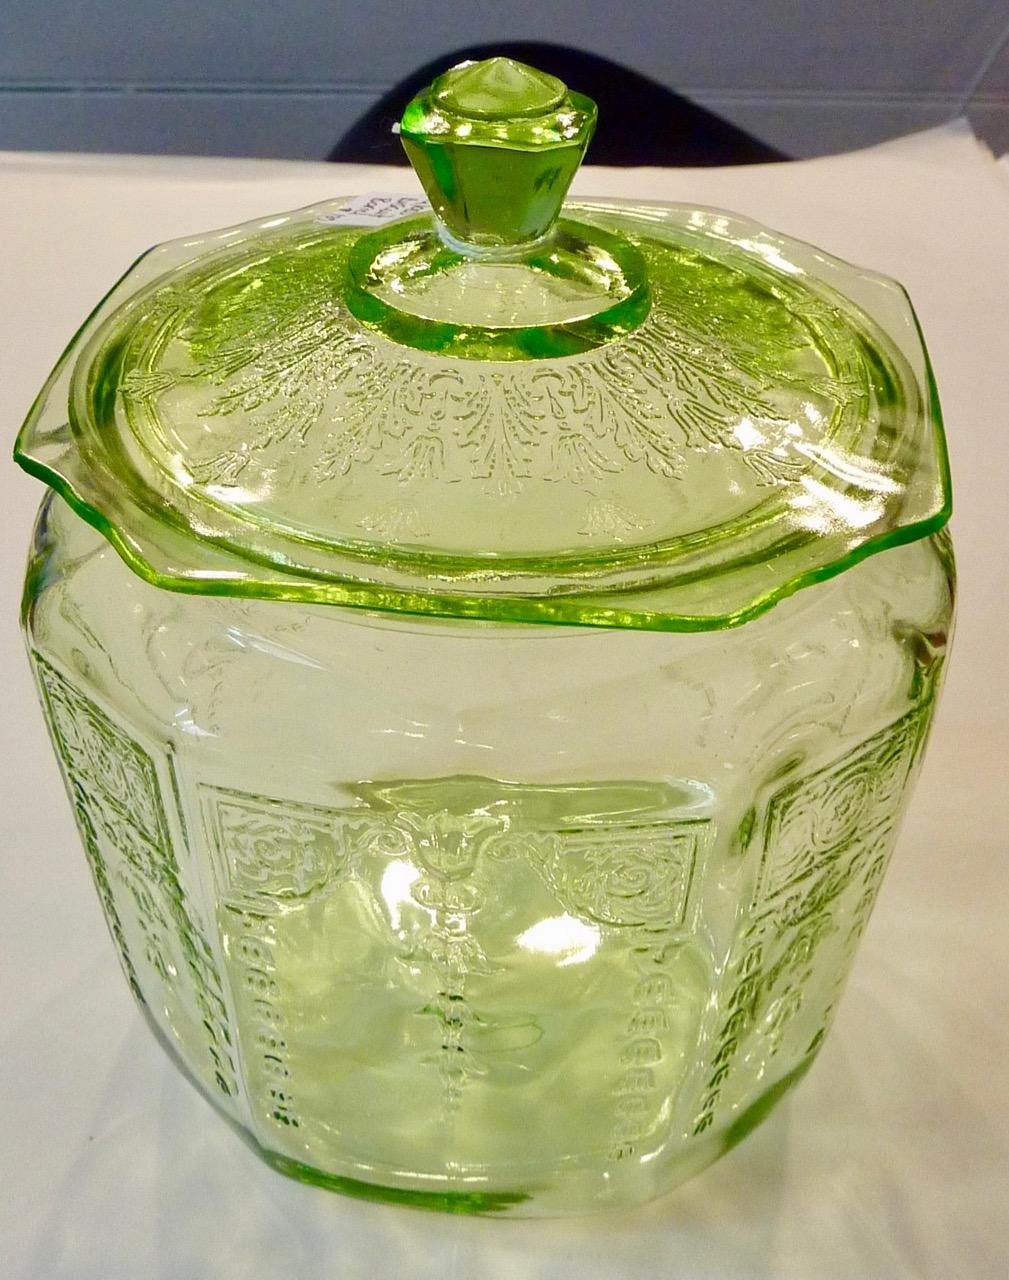 (<a href="https://commons.wikimedia.org/wiki/File:Depression_Glass_Biscuit_Barrel.jpg#/media/File:Depression_Glass_Biscuit_Barrel.jpg">Tangerineduel</a>/CC BY-SA 4.0)